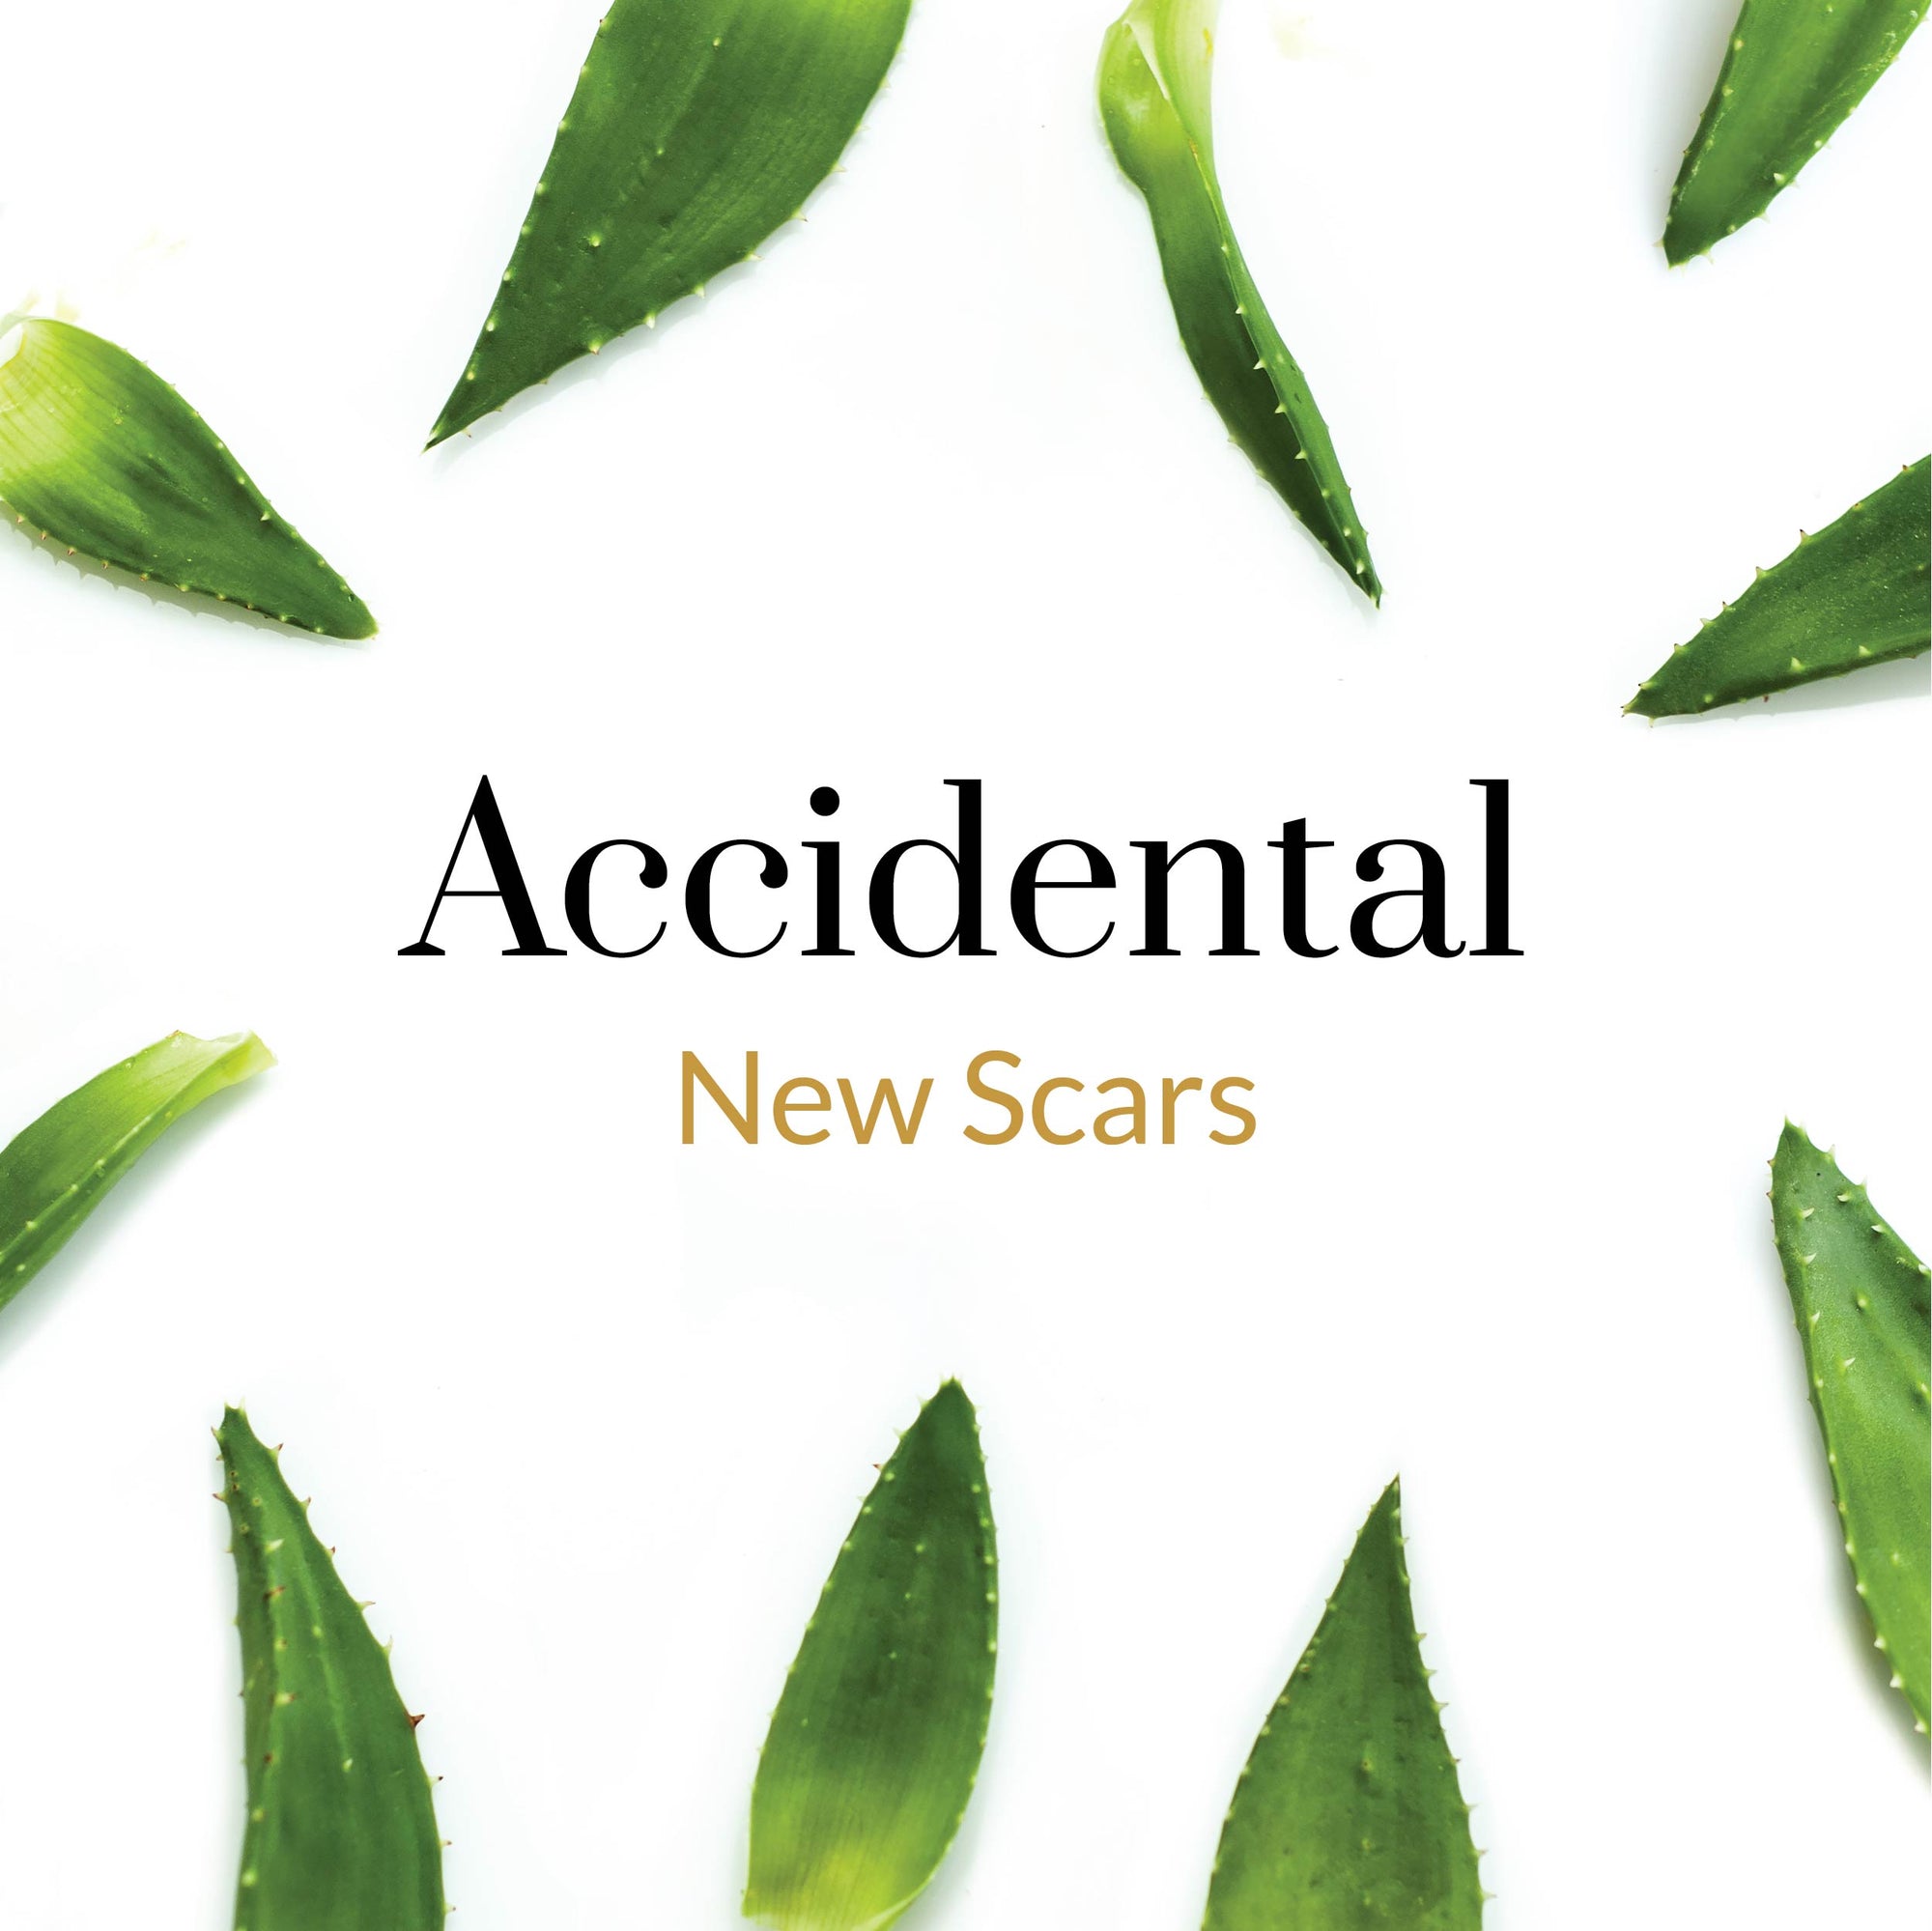 New Scars - Accidental